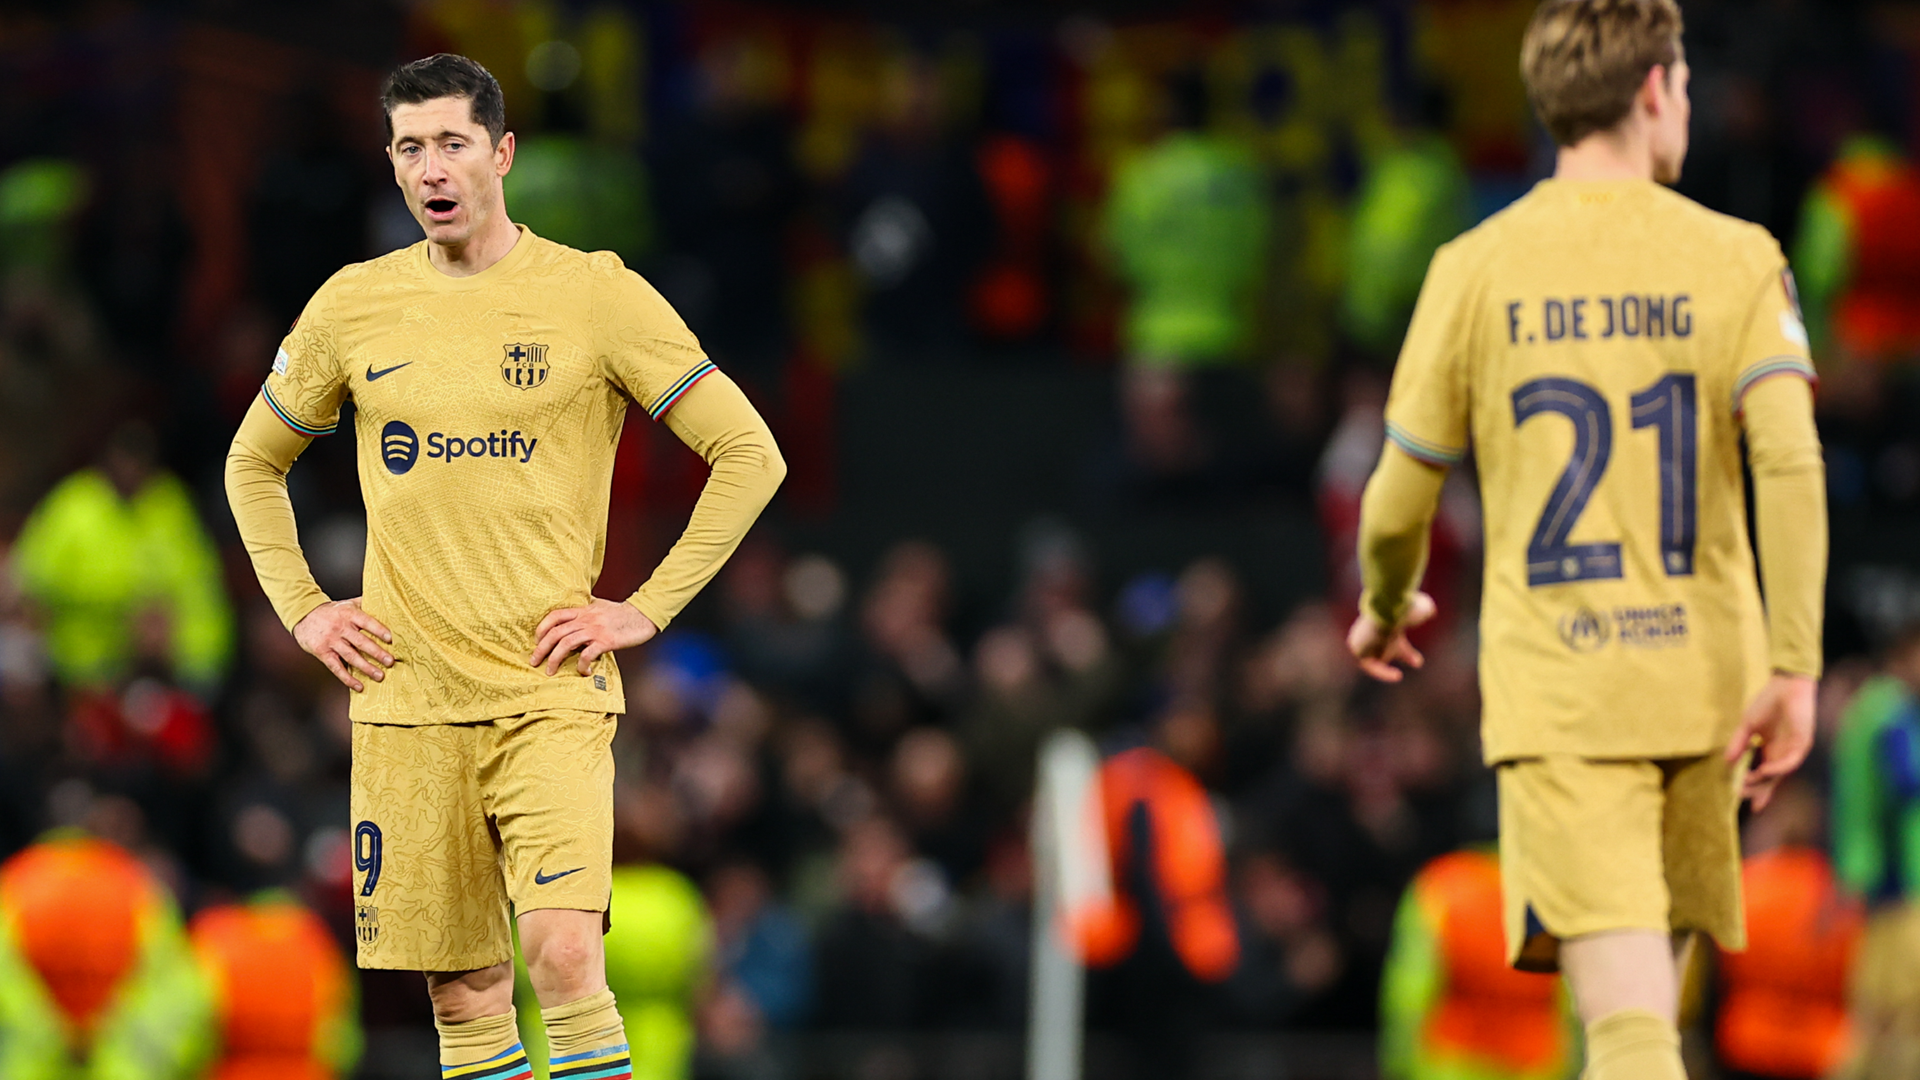 Barca's Robert Lewandowski seemingly disappointed after losing out to Man Utd. De Jong is in the same picture facing him